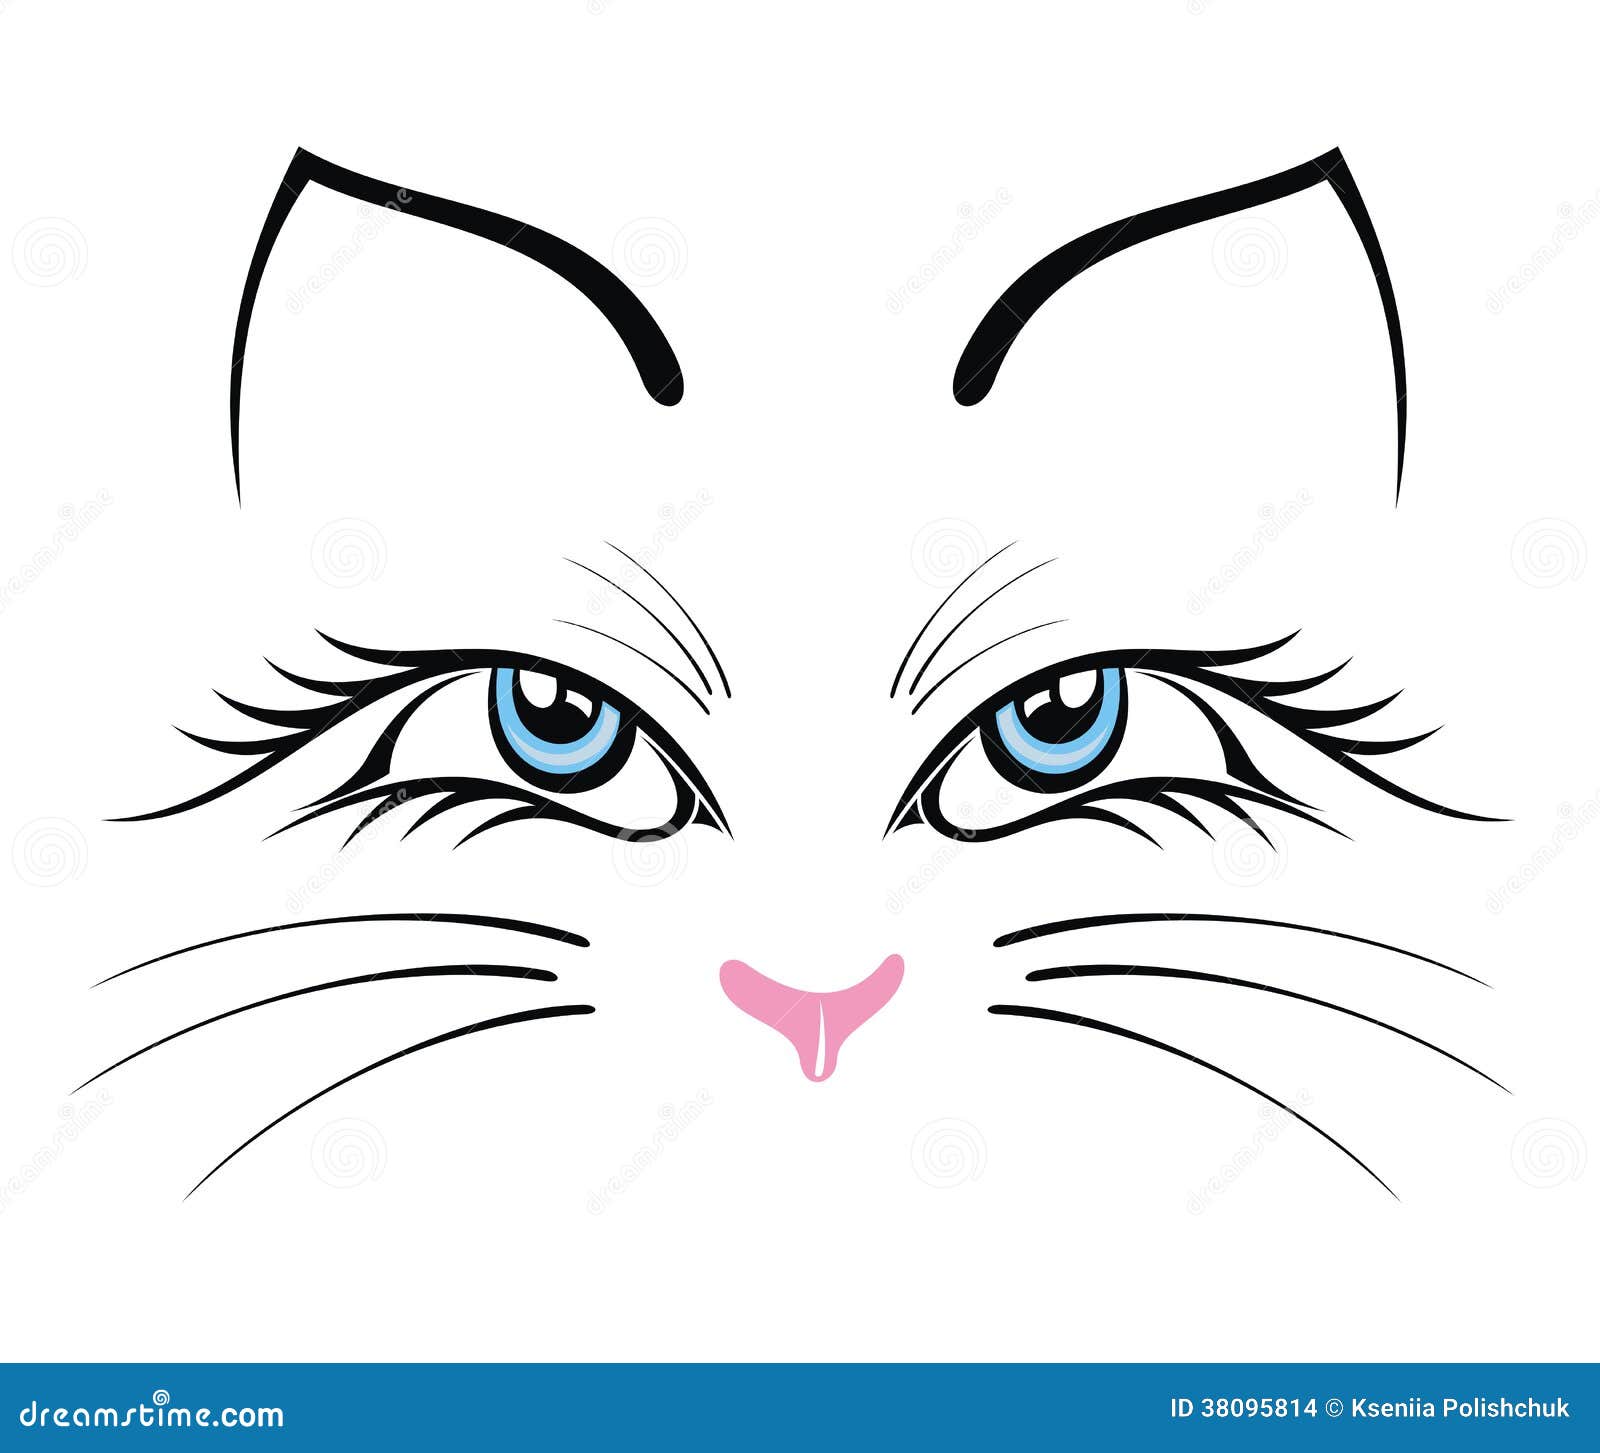 cat whiskers clipart - photo #49